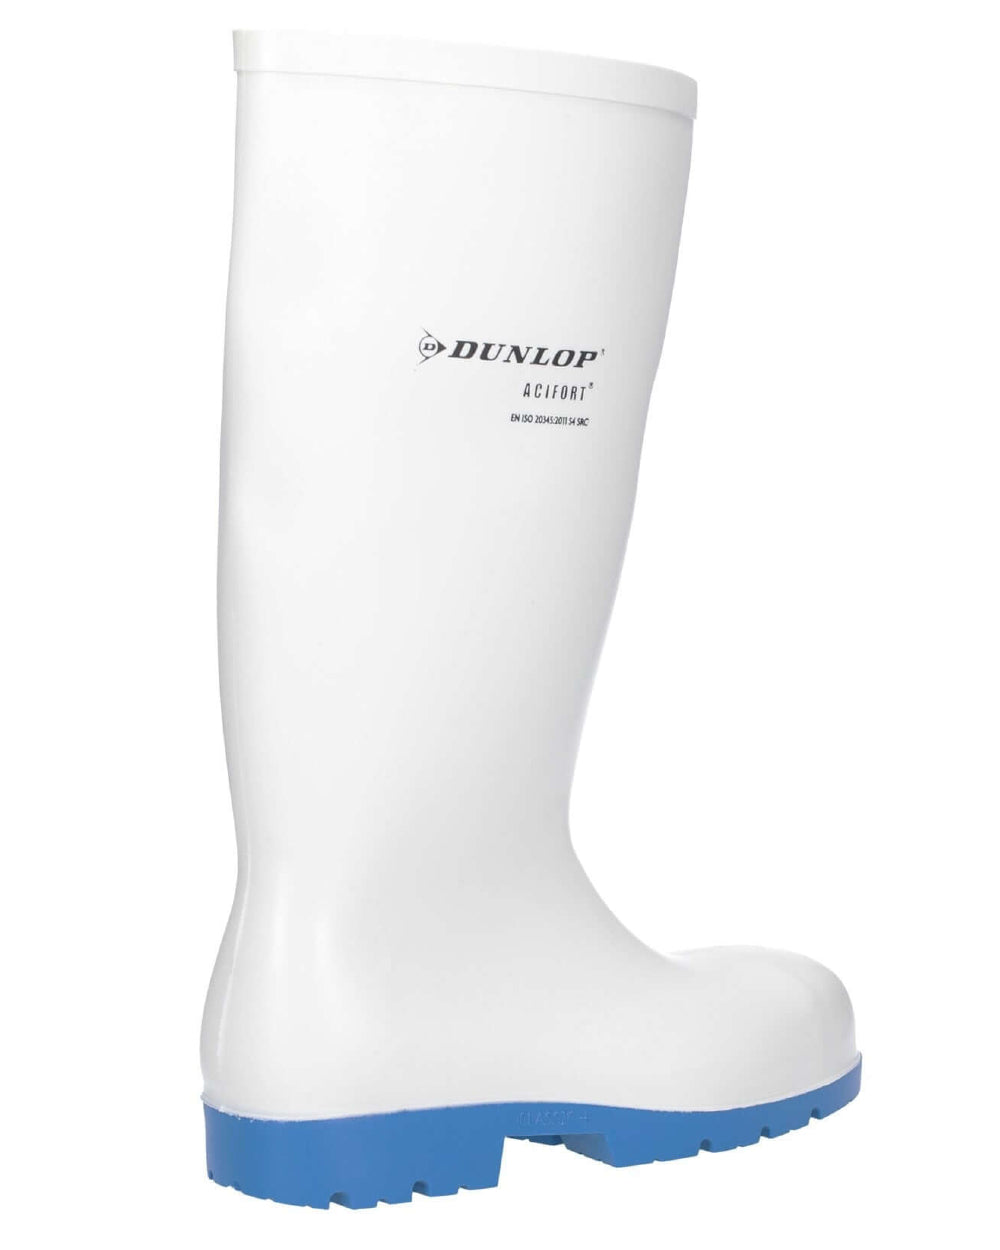 White coloured Dunlop Acifort Classic+ Waterproof Safety Wellingtons on white background 